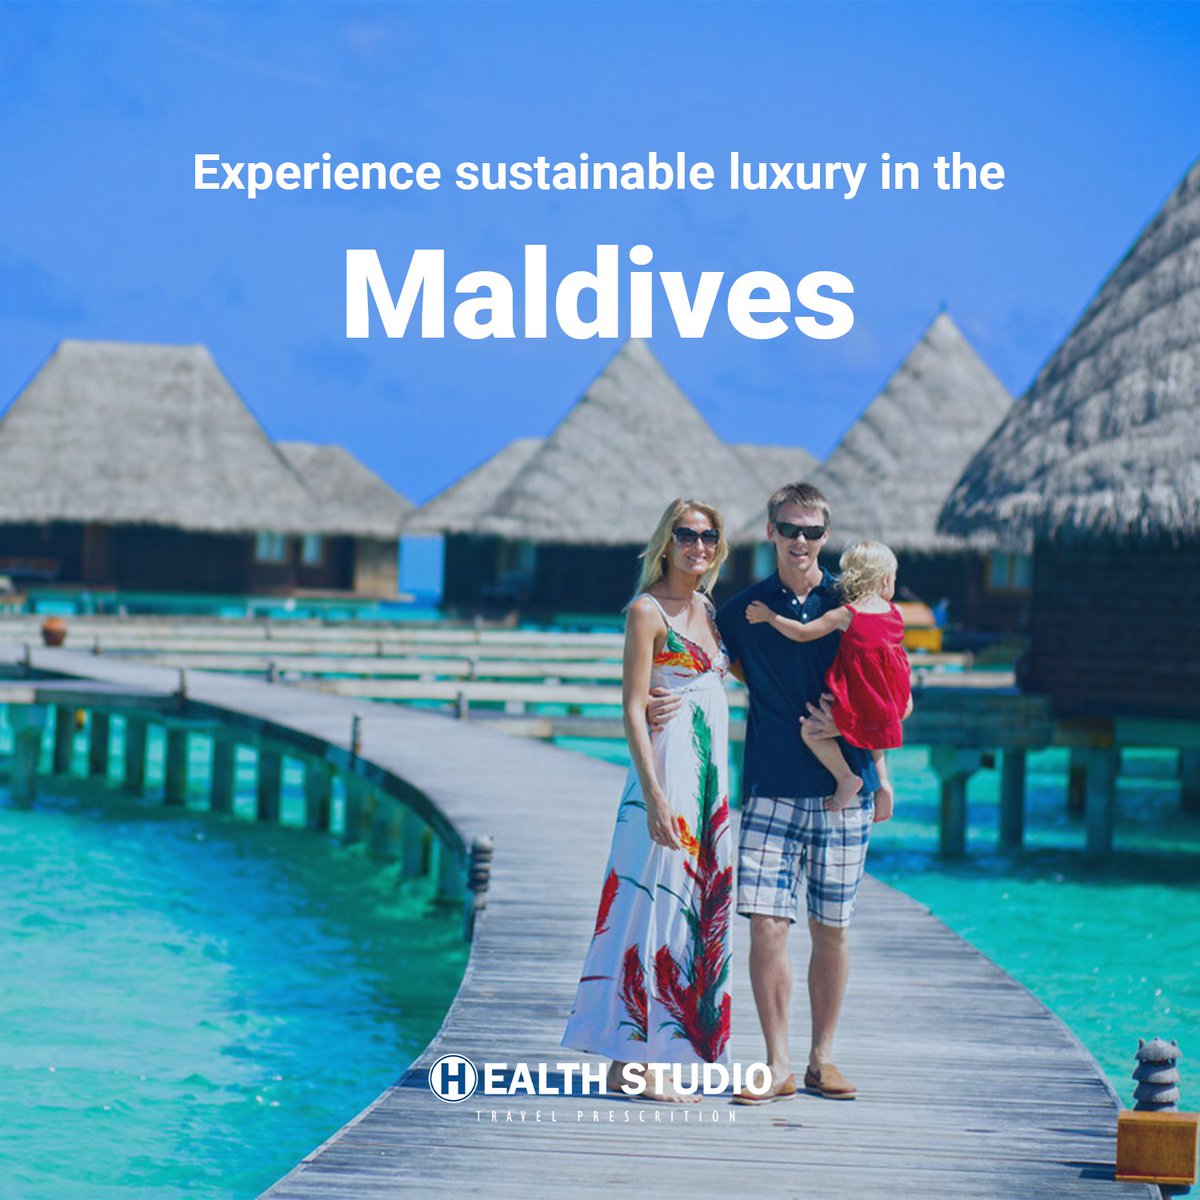 Experience sustainable luxury in the Maldives! With a commitment to preserving its natural beauty. Discover breathtaking vistas perfect for relaxation and romance:

+9647812900002
+9647712900002